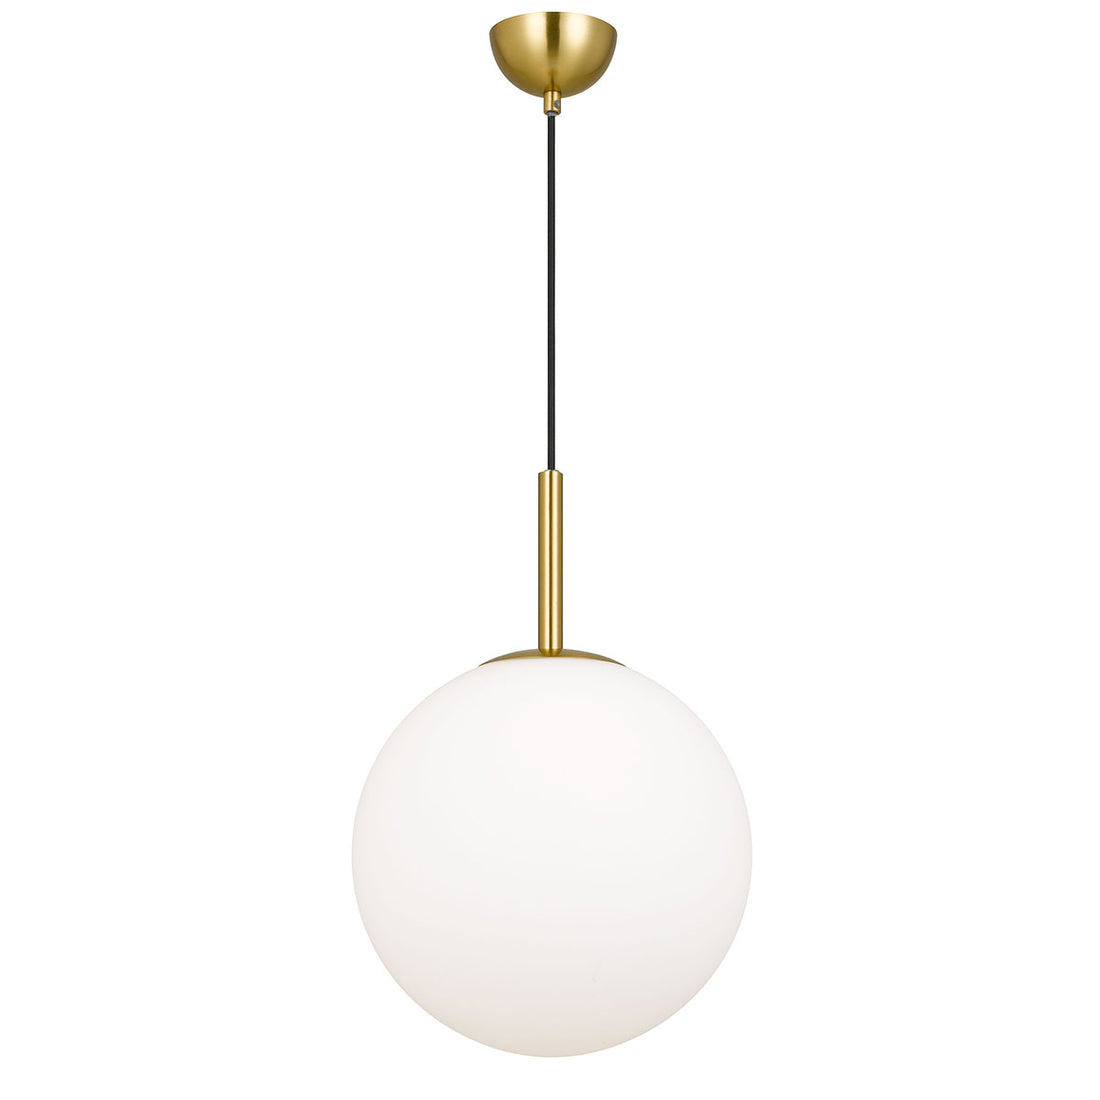 Bally 30cm Antique Gold with Opal Glass Modern Pendant